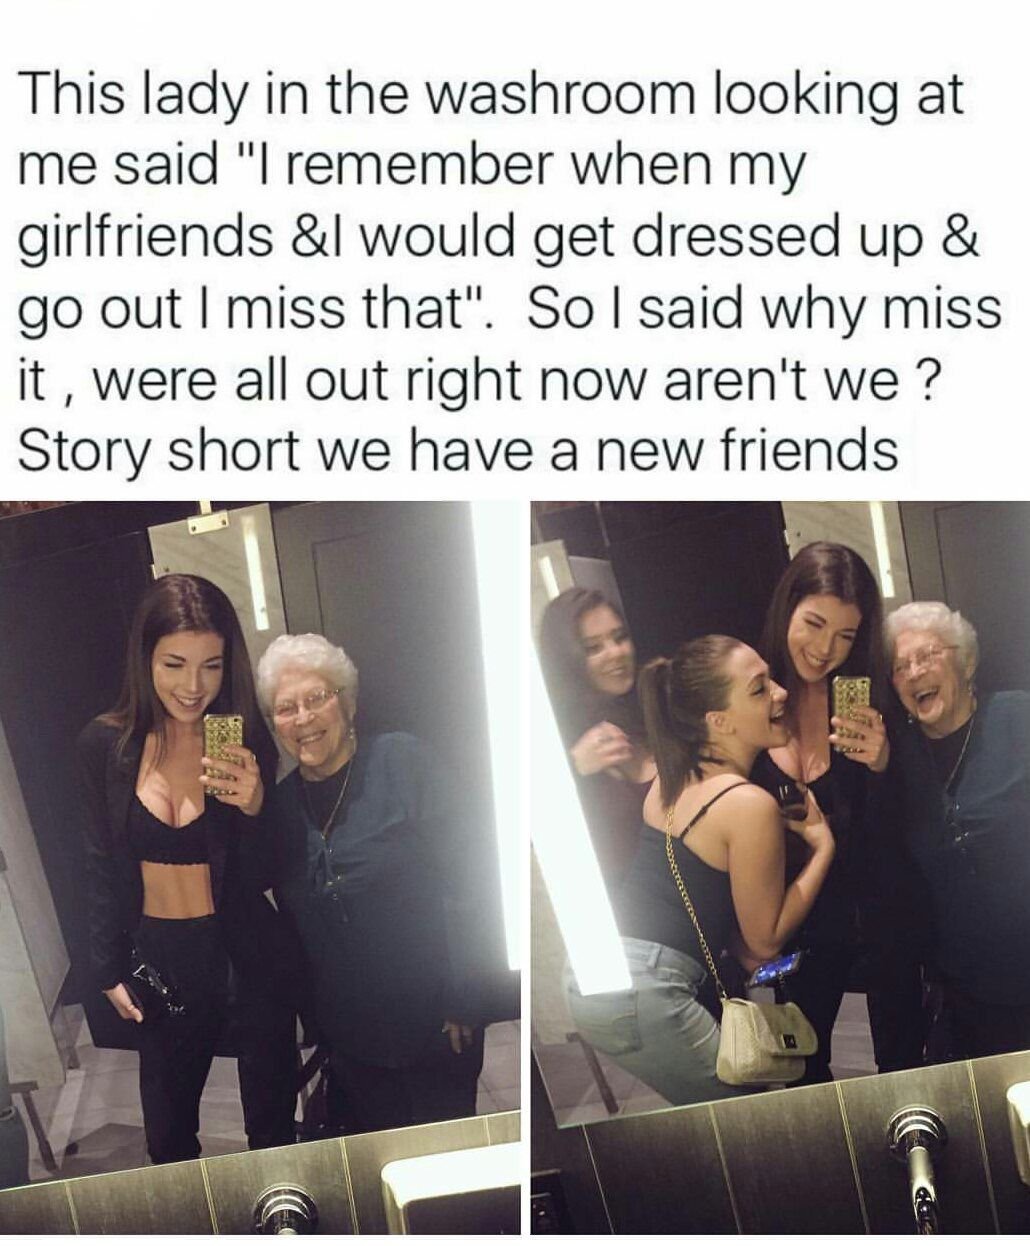 funny memes girls night out - This lady in the washroom looking at me said "I remember when my girlfriends &l would get dressed up & go out I miss that". So I said why miss it, were all out right now aren't we? Story short we have a new friends